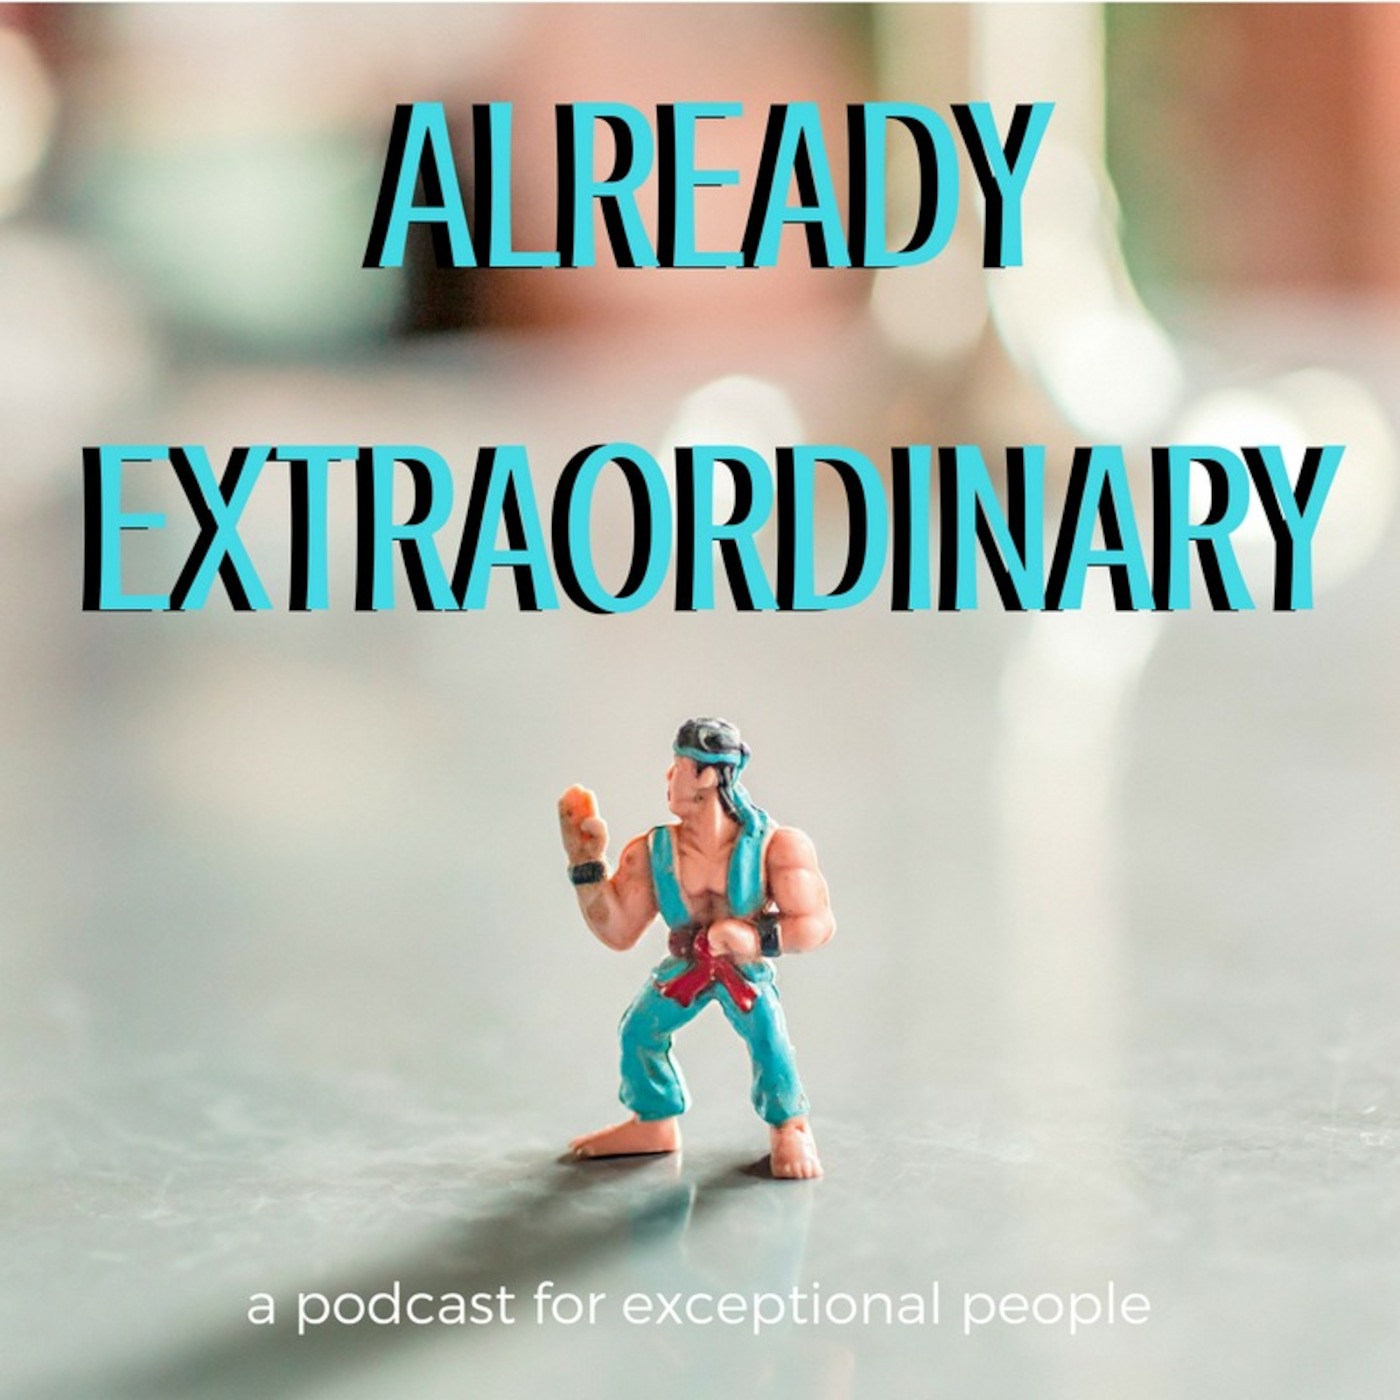 Already Extraordinary with Kate Browne